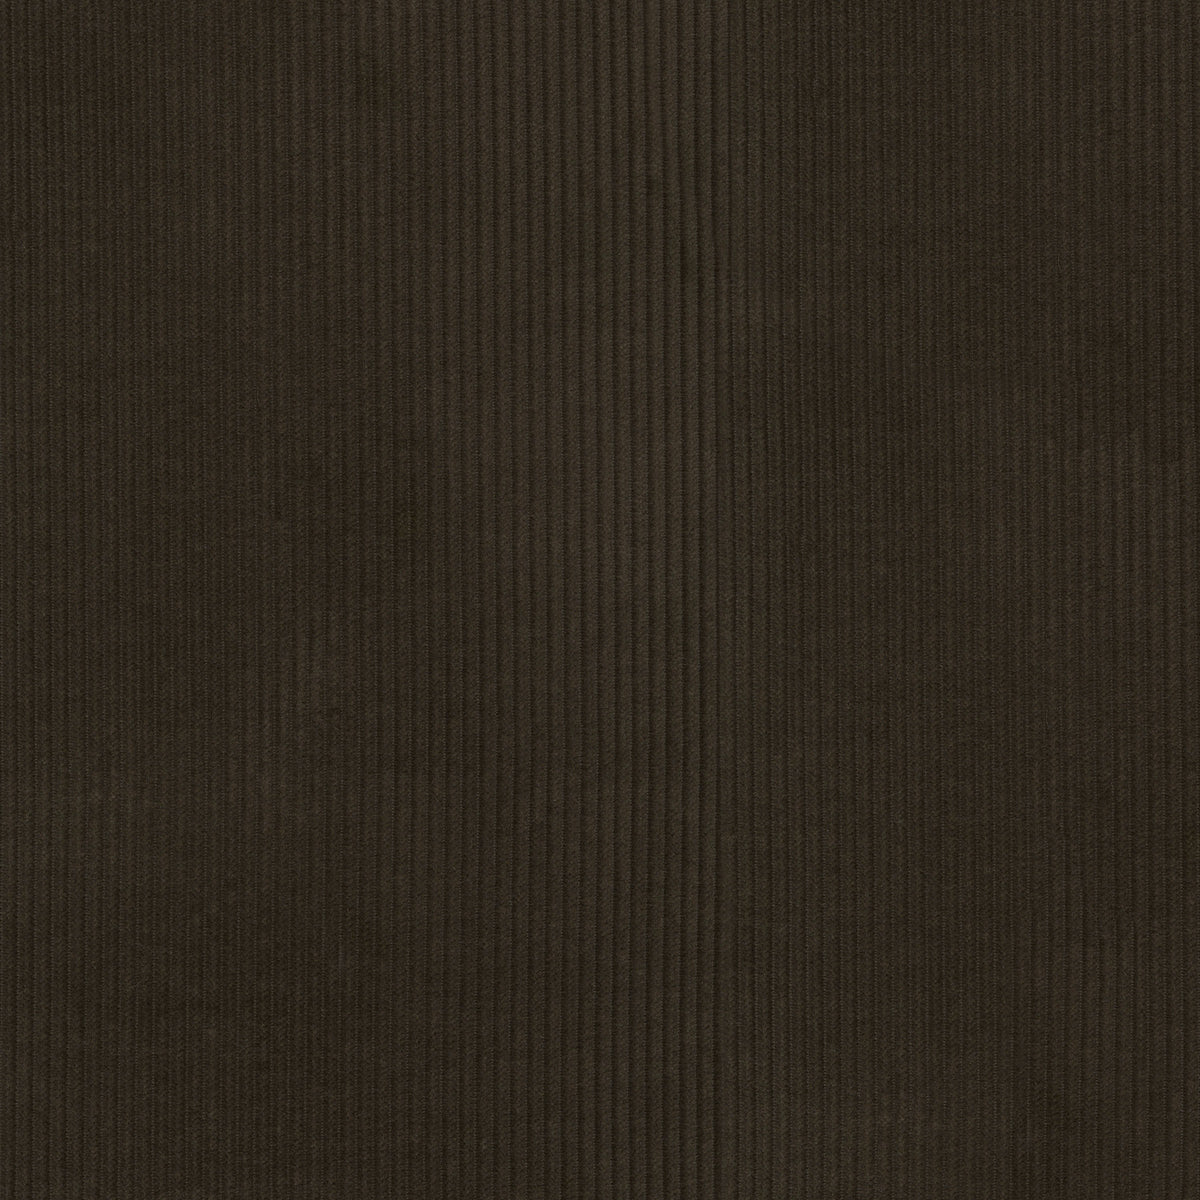 P/K Lifestyles Wales - Chocolate 412038 Upholstery Fabric